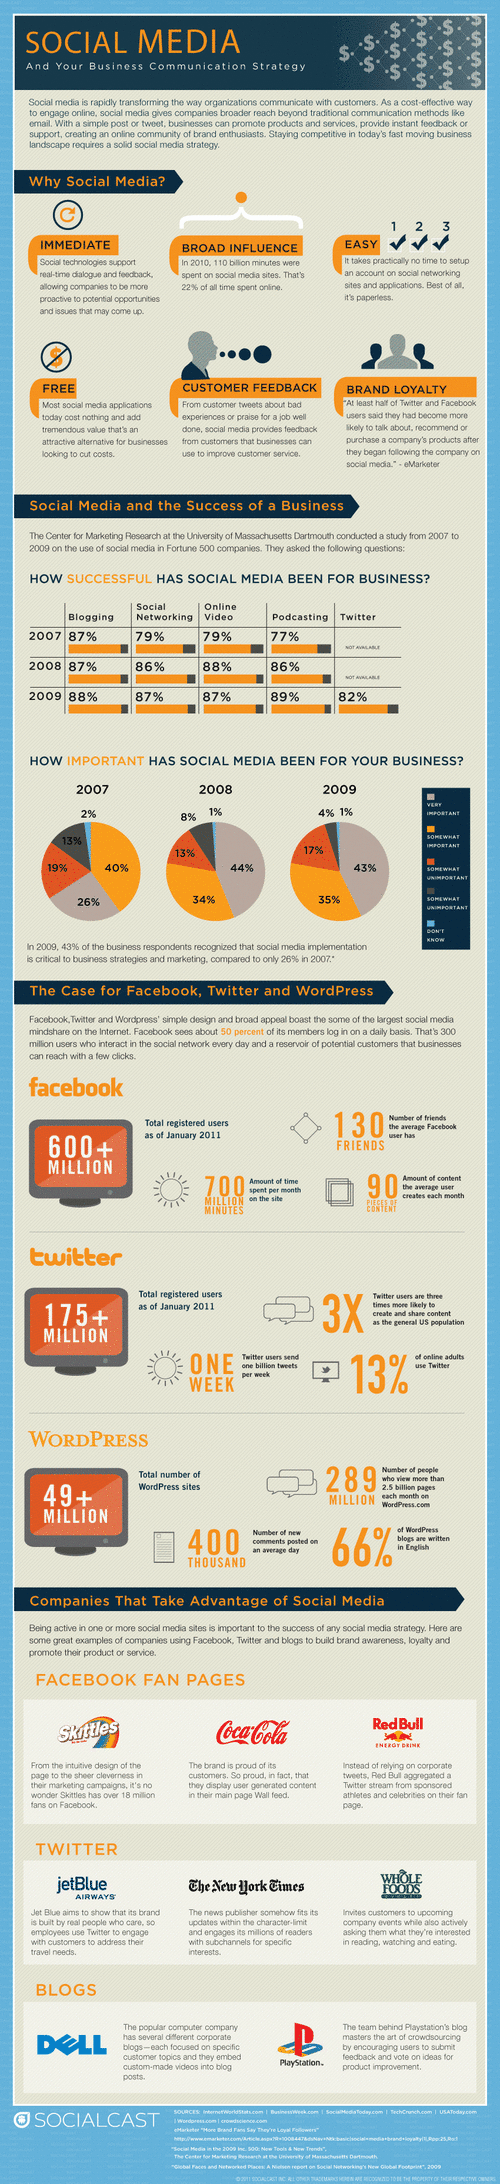 Social Media 101: Twitter, Facebook And WordPress Build Brand Loyalty [INFOGRAPHIC]